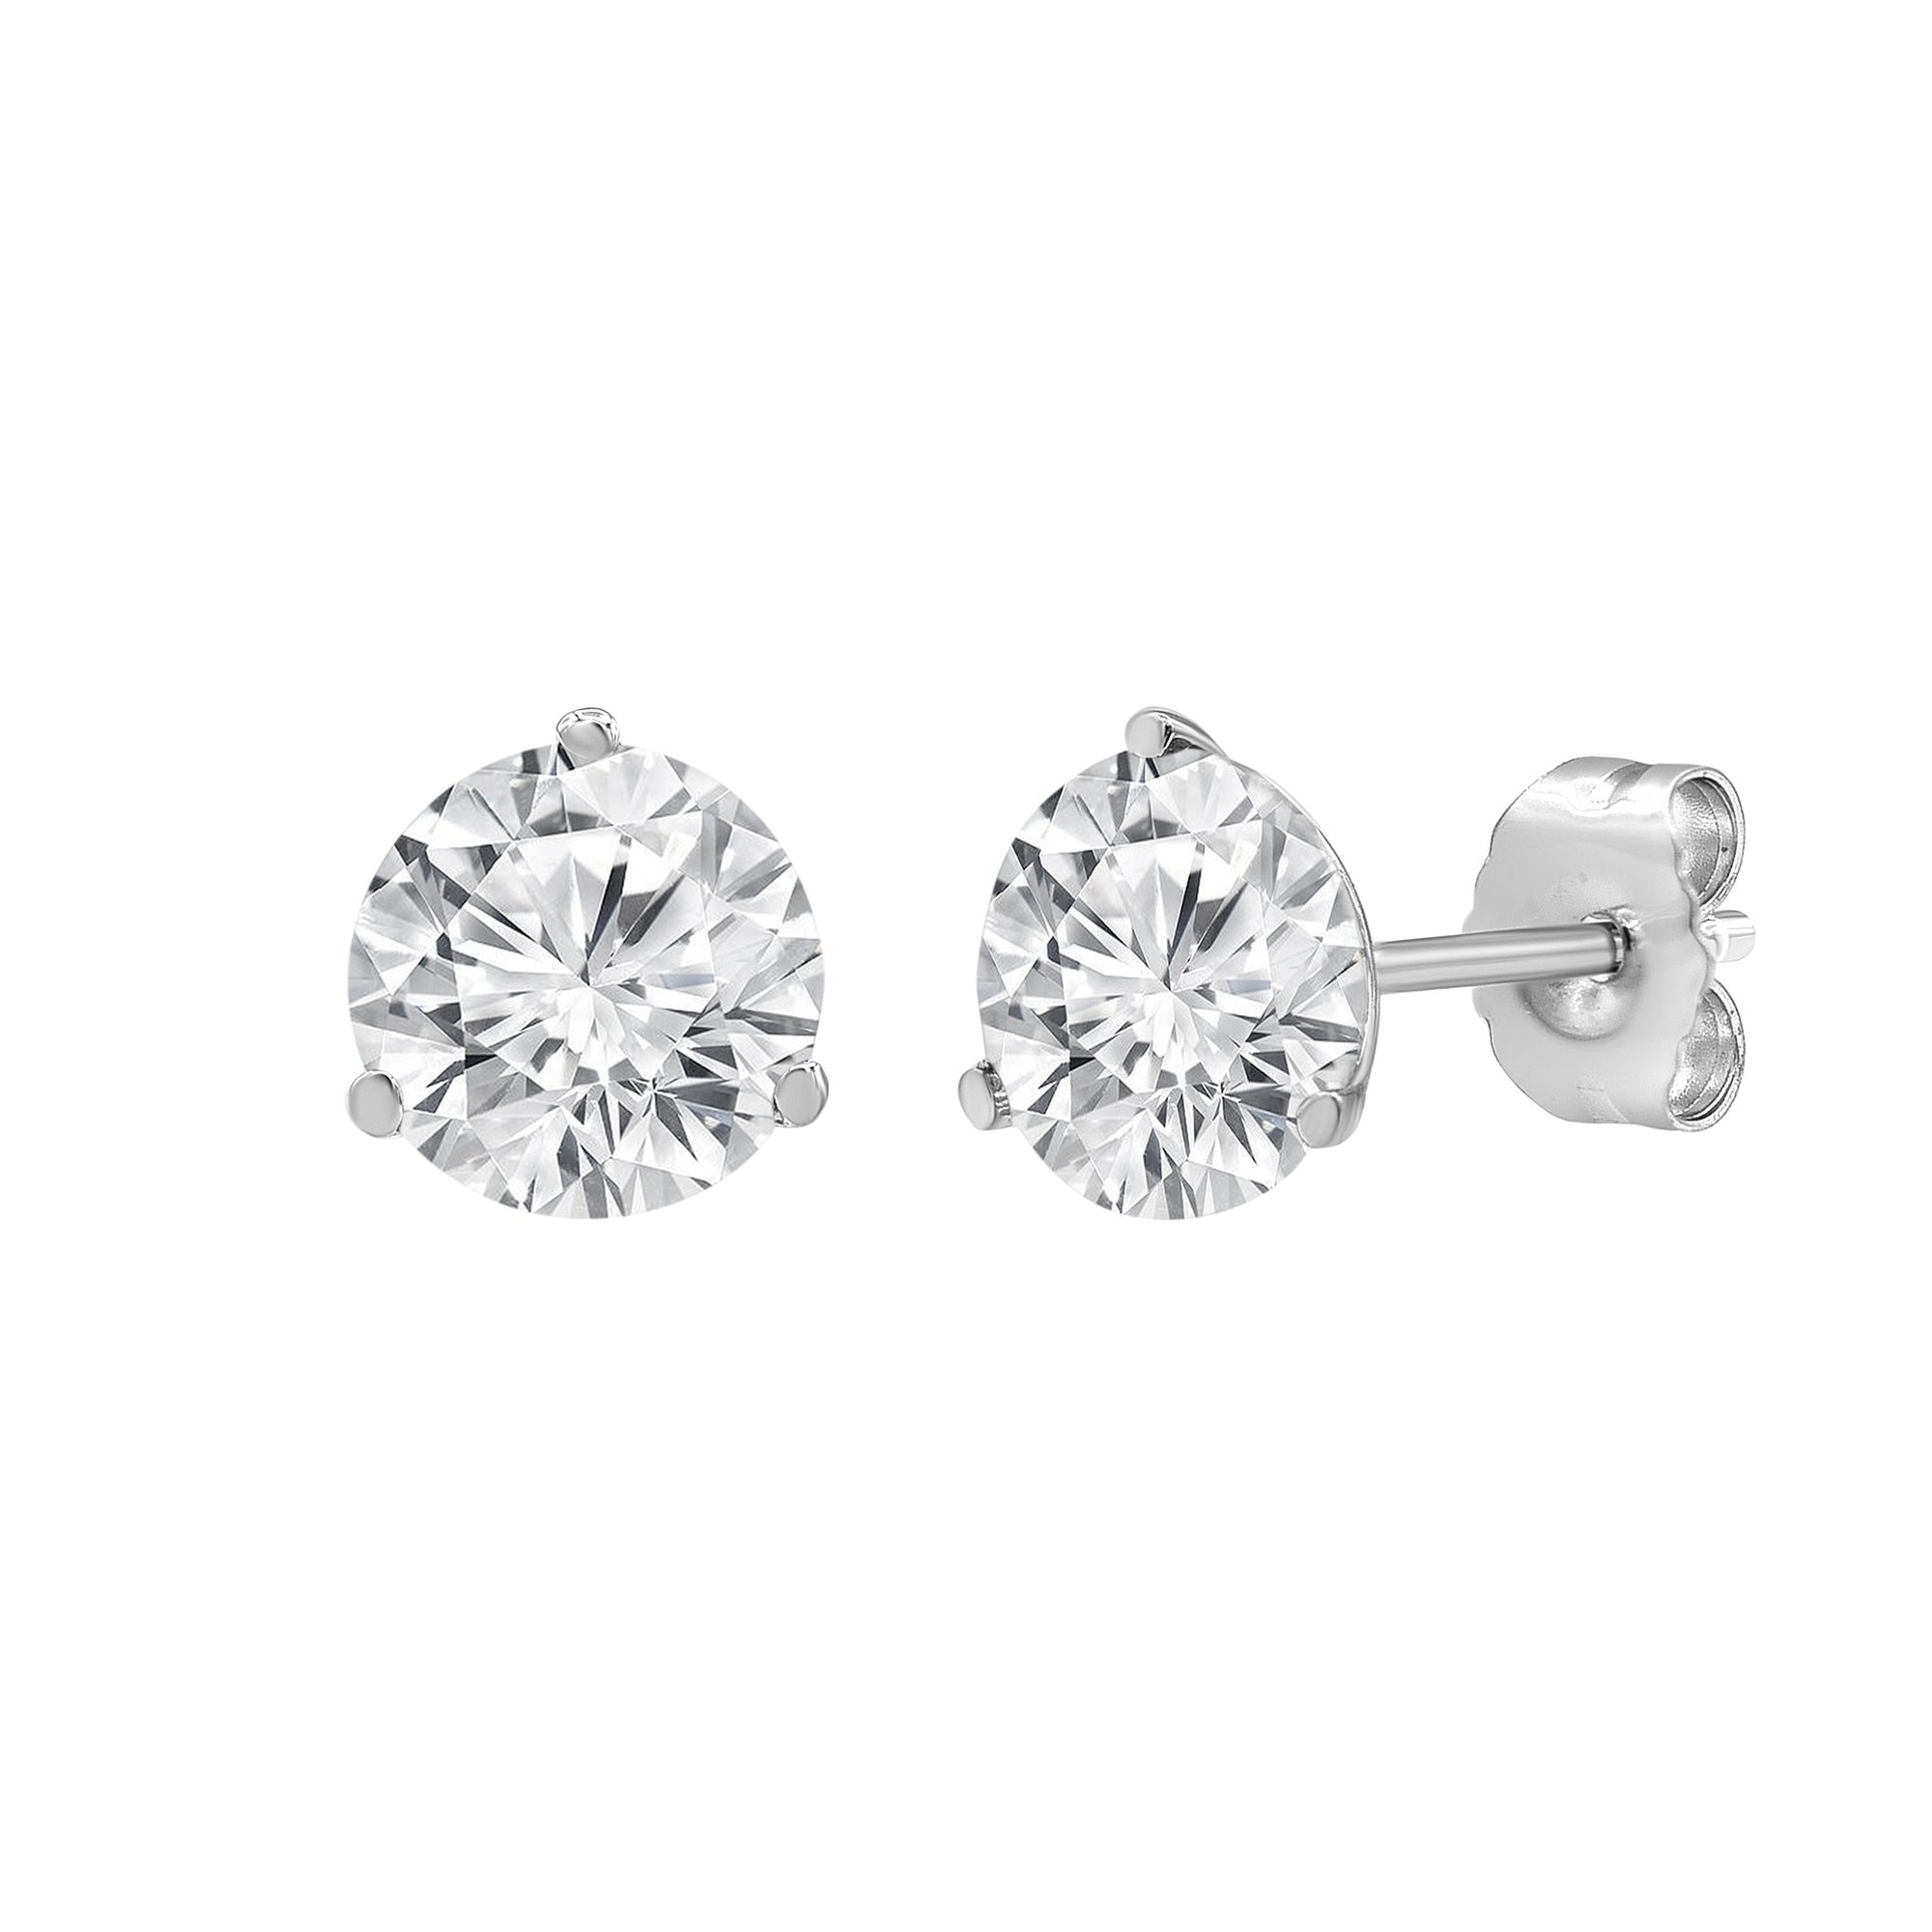 2.50 cttw 3-Prong Martini Studs - Round